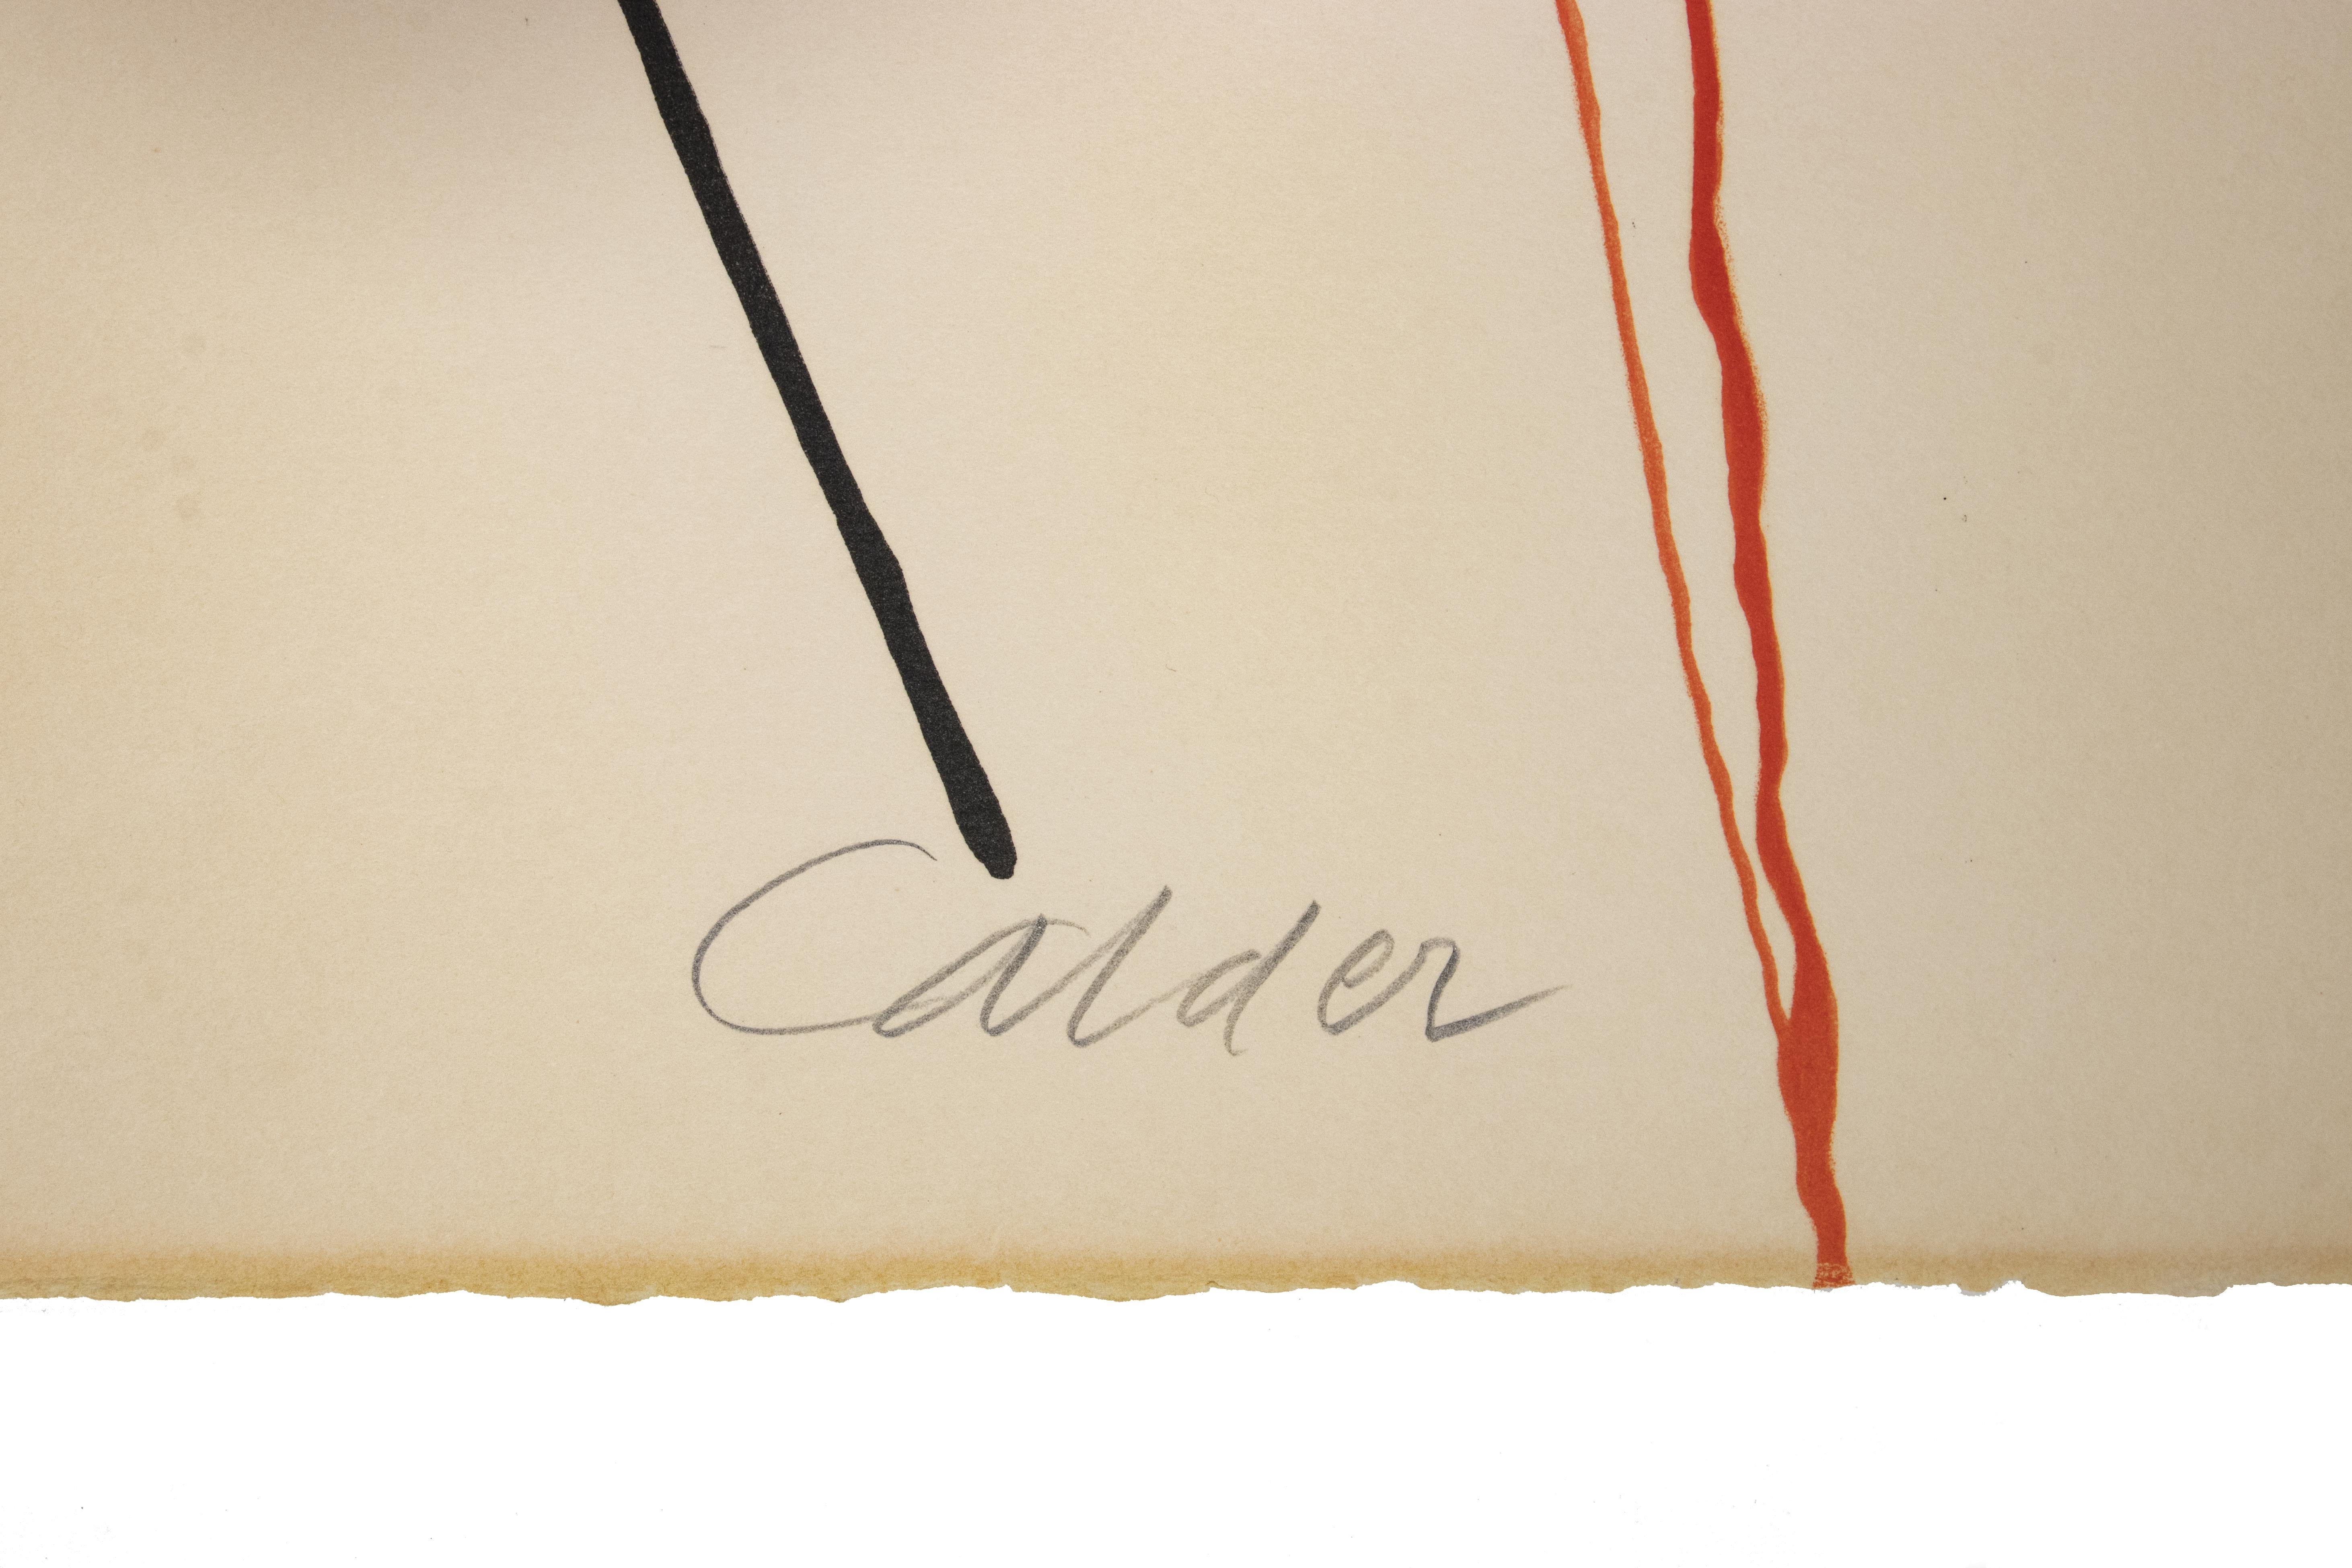 Untitled is an original contemporary artwork realized by Alexander Calder.

Mixed colored lithograph.

Hand signed and numbered on the lower margin.

Edition of 49/125

Good conditions except for a light yellowing of paper along the margin.
